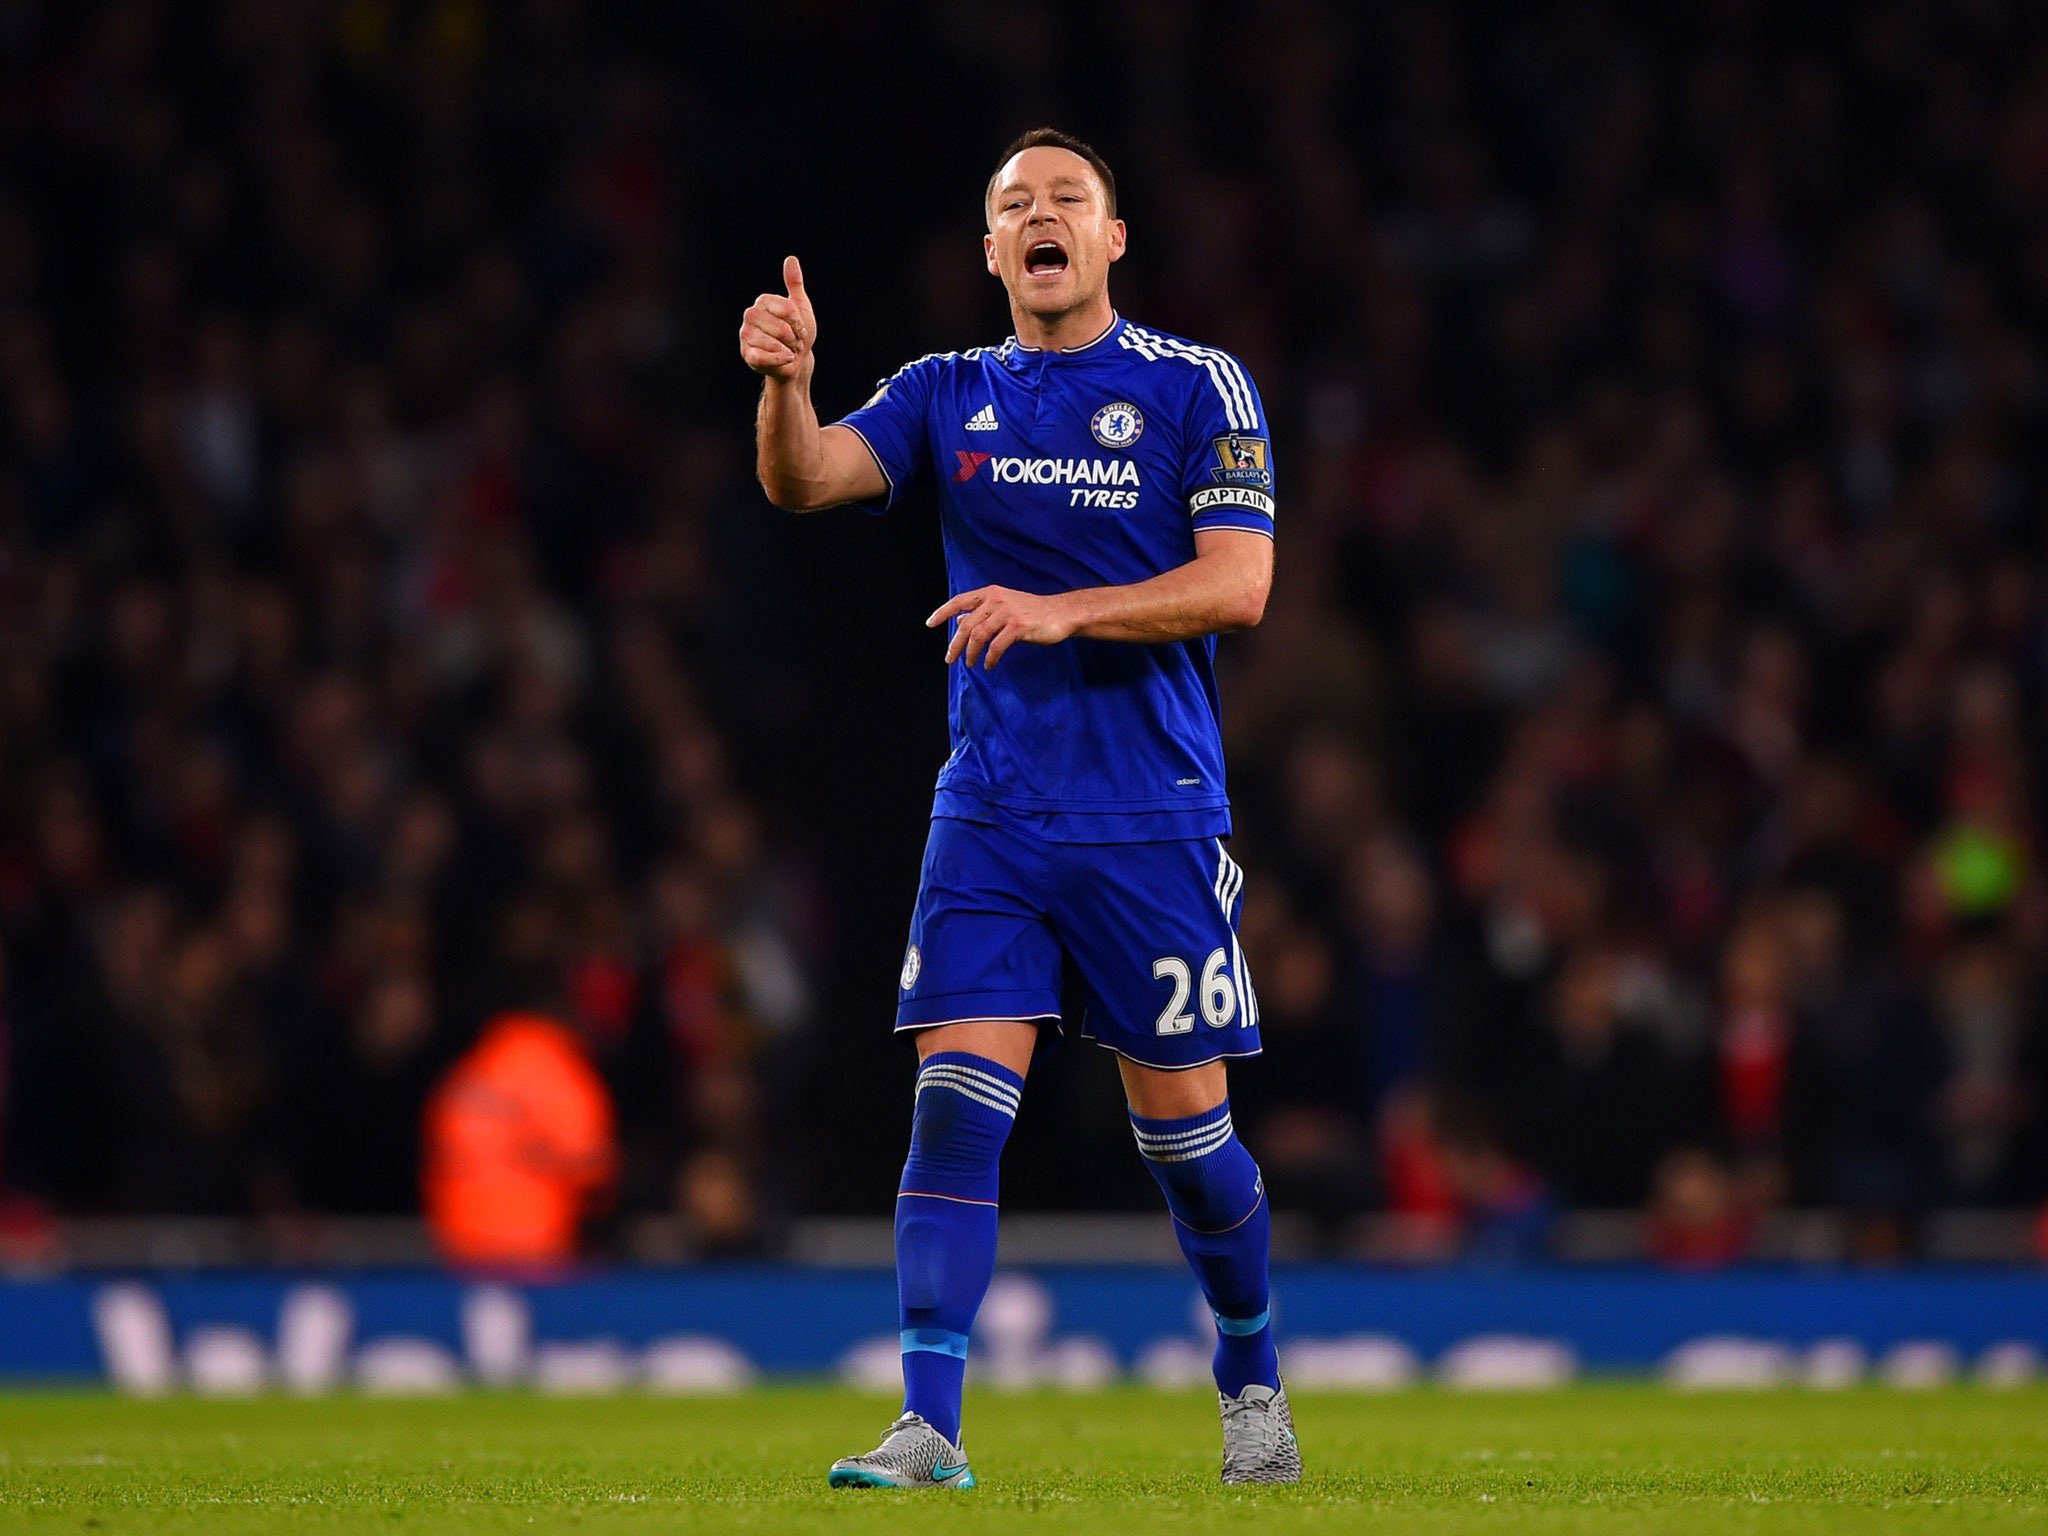 Happy 40th birthday to former Chelsea and England defender John Terry! 